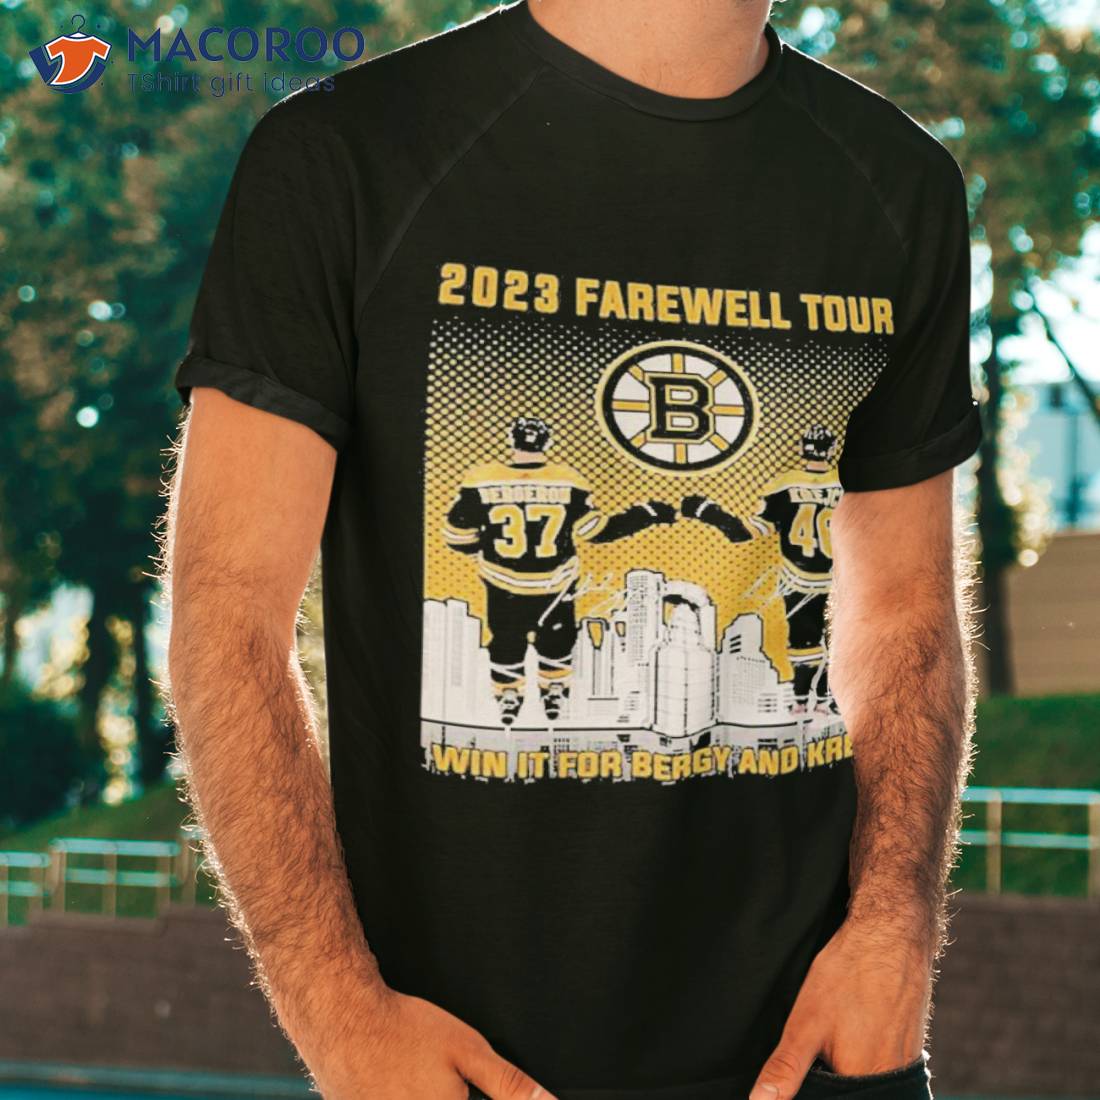 Boston Bruins T-Shirts for Sale